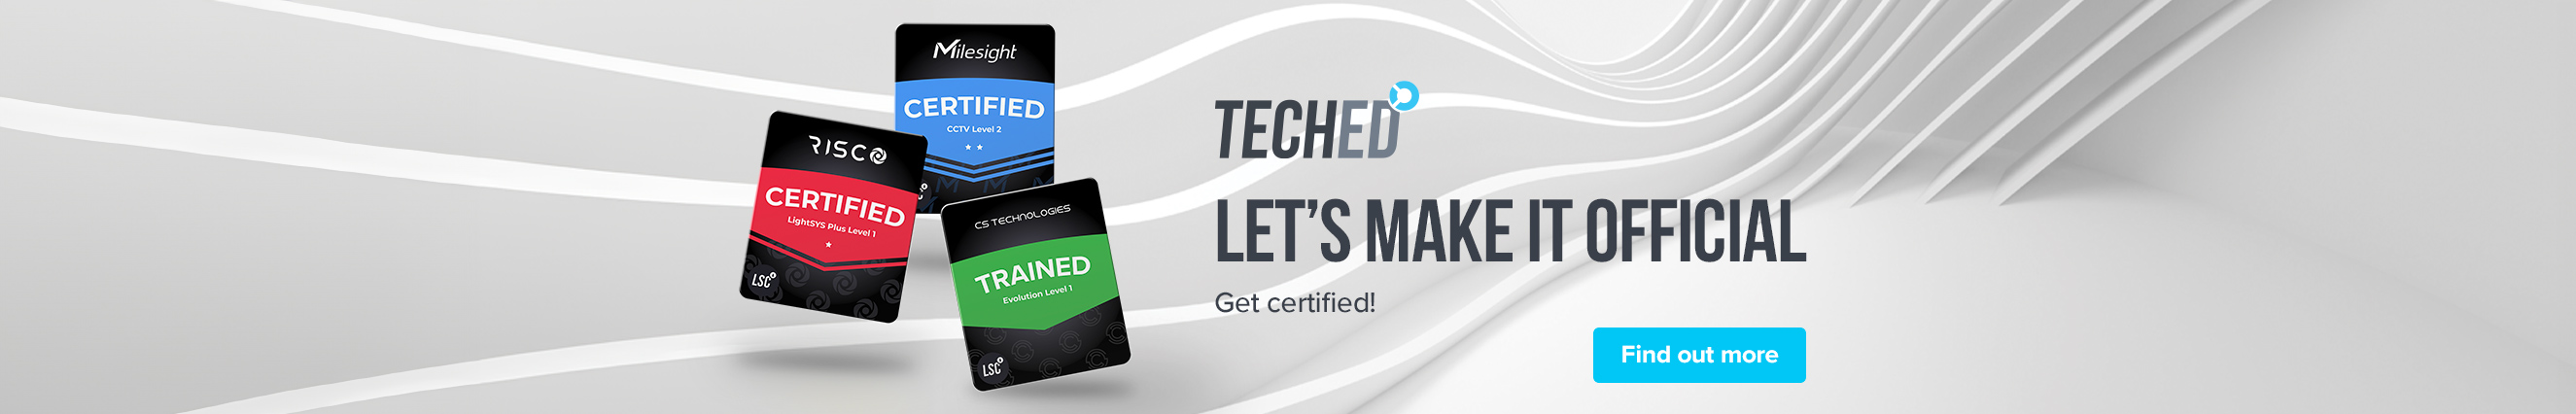 teched certification banner